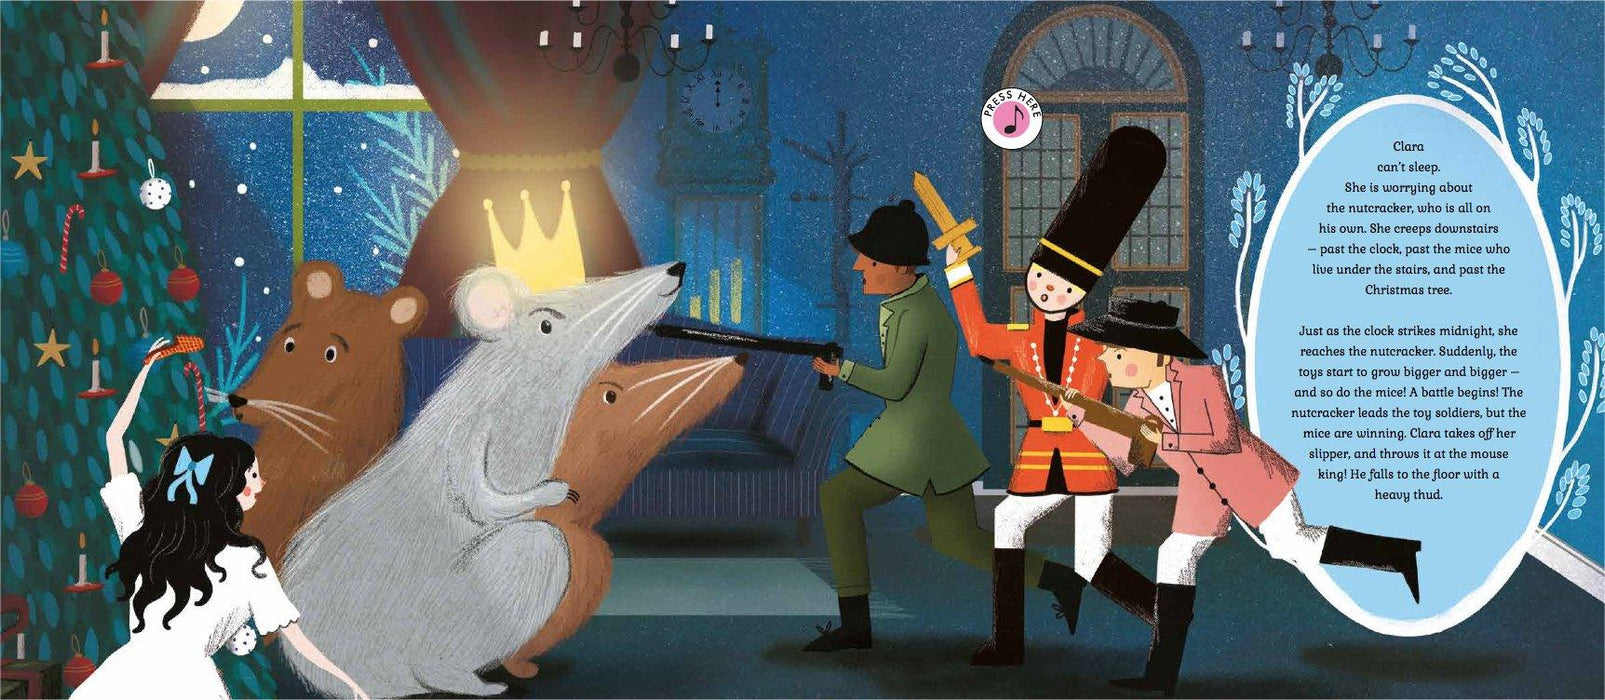 The Story Orchestra: The Nutcracker (Hardcover) - My Playroom 